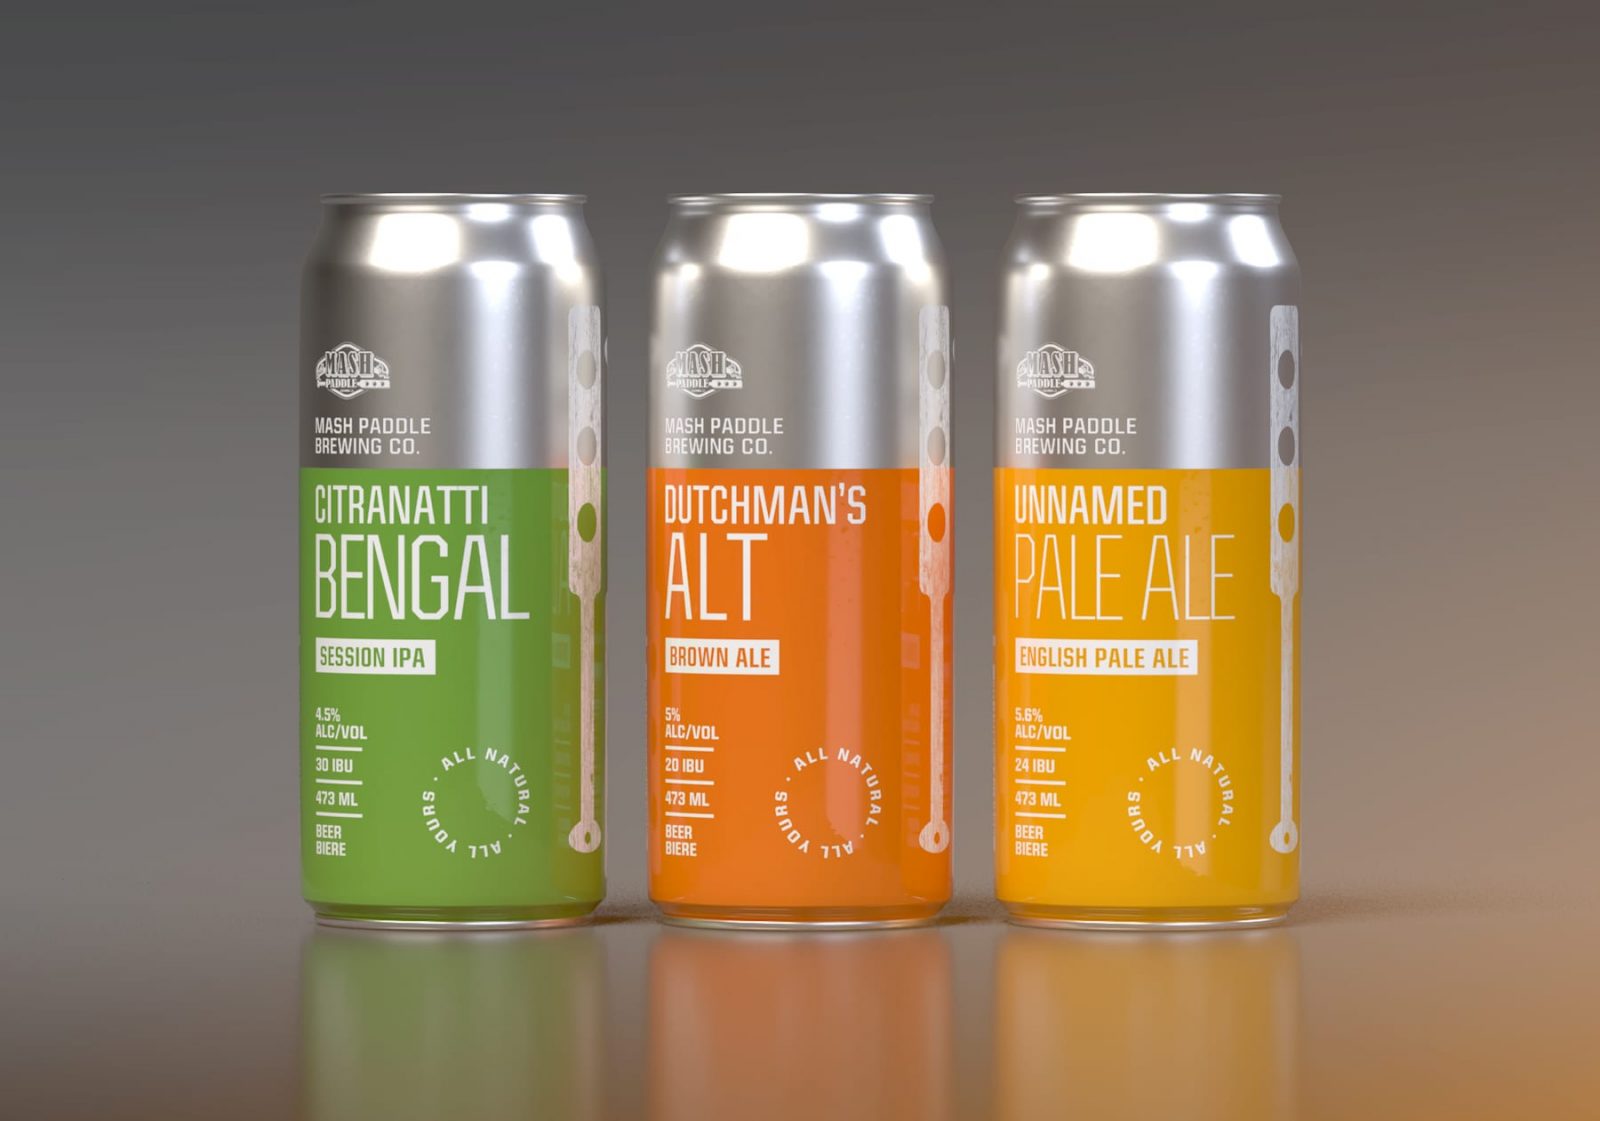 Clean, Minimal Packaging for an Ontario Craft Brewer